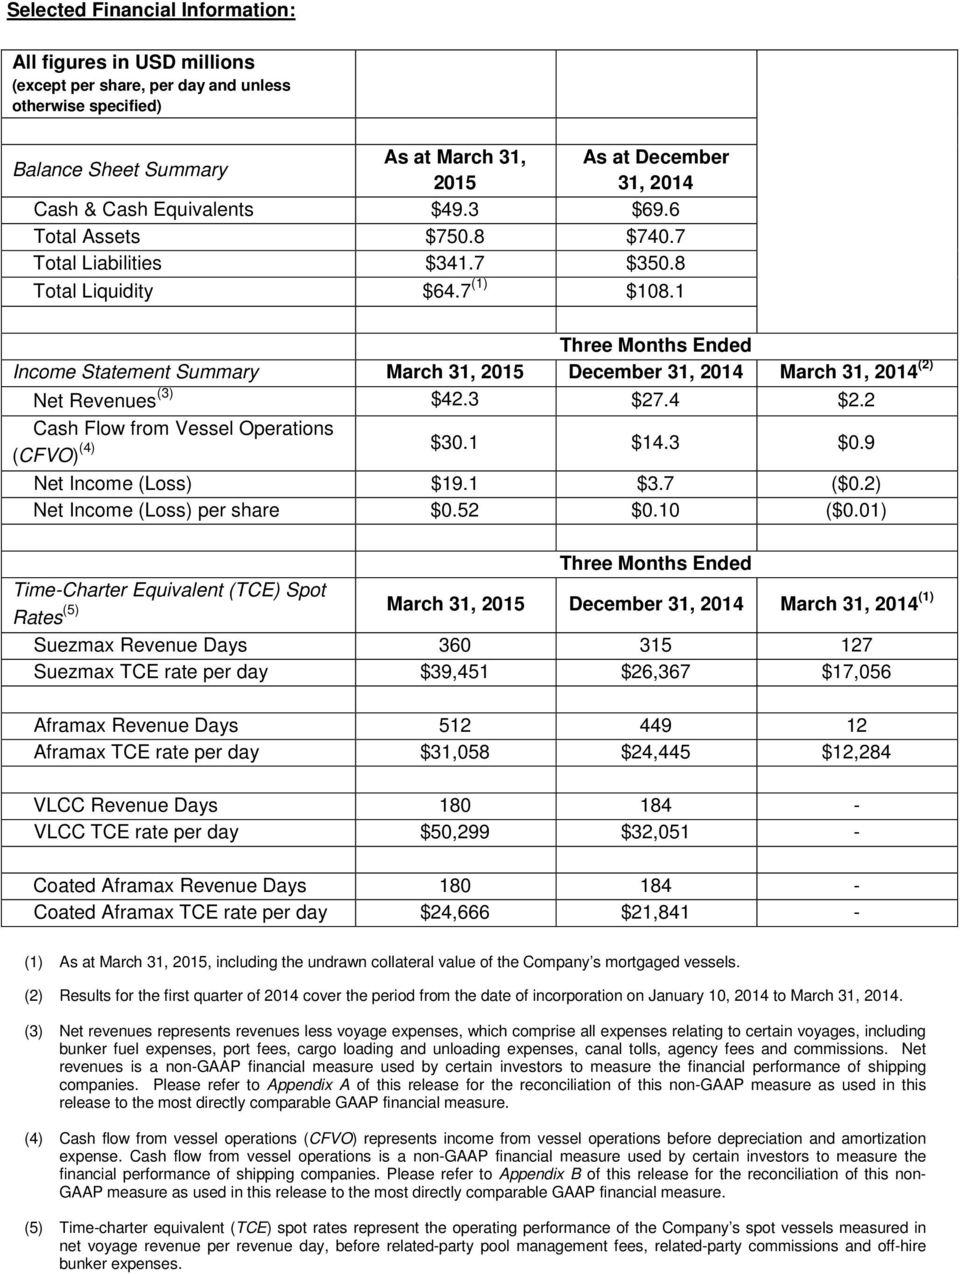 1 Three Months Ended Income Statement Summary March 31, 2015 December 31, 2014 March 31, 2014 (2) Net Revenues (3) 42.3 27.4 2.2 Cash Flow from Vessel Operations (CFVO) (4) 30.1 14.3 0.